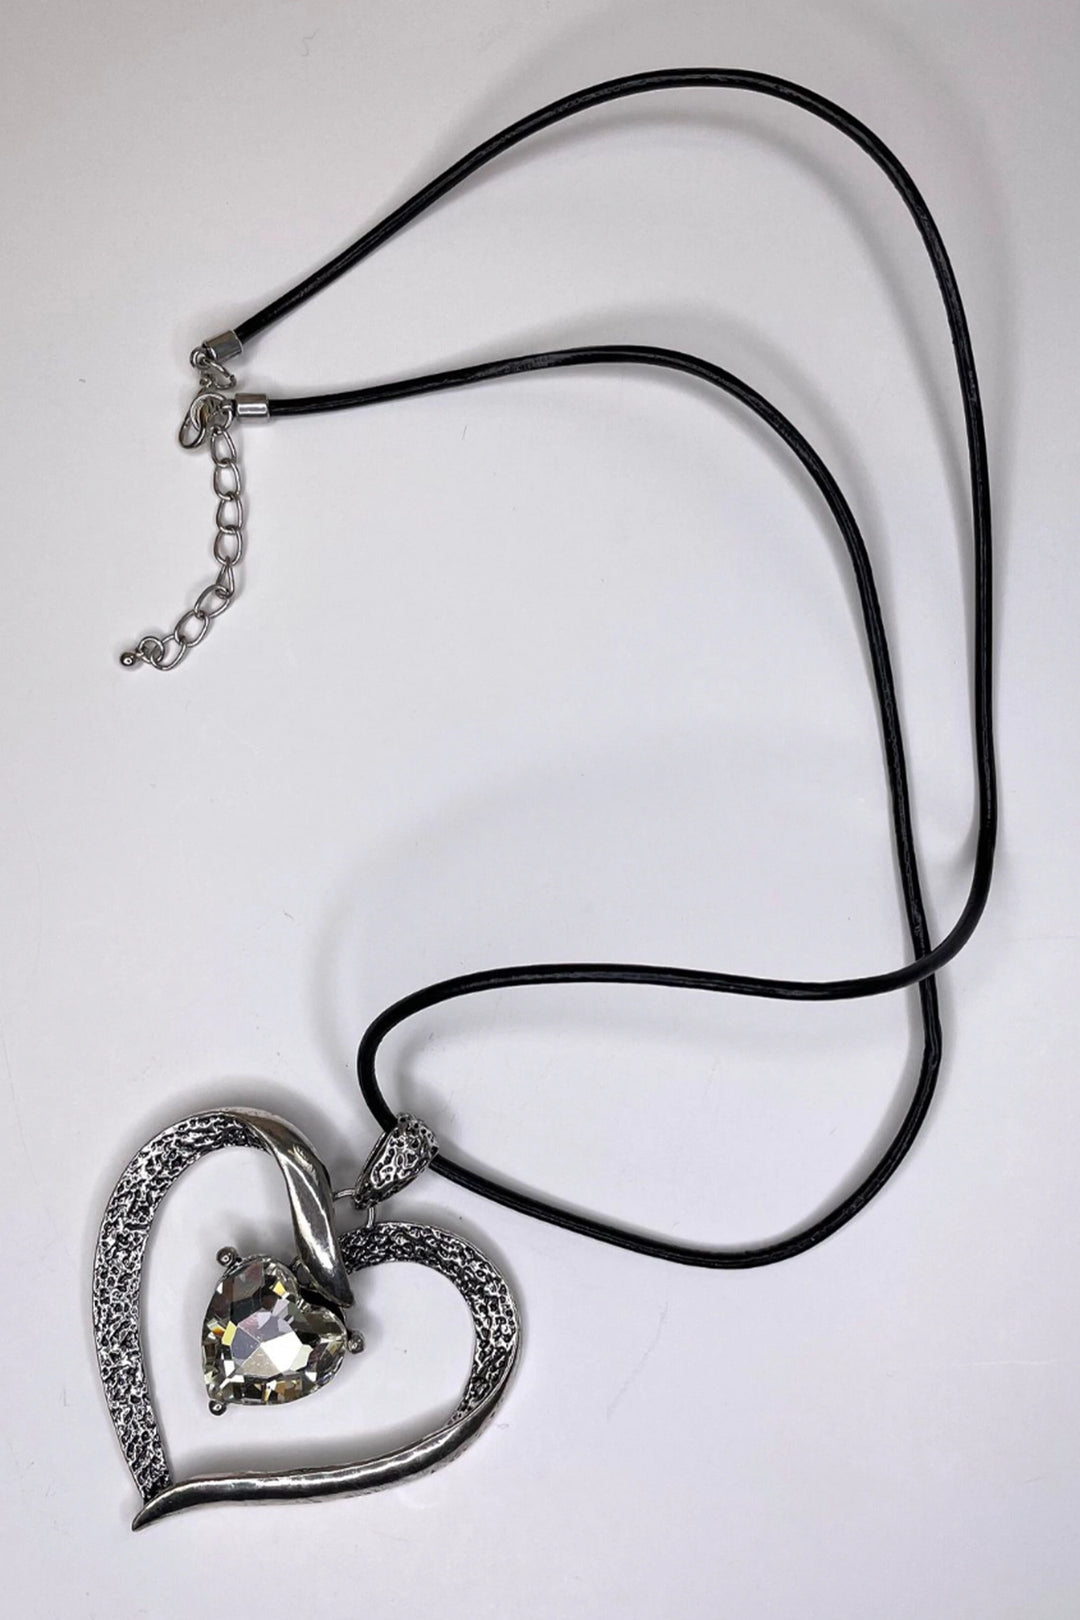 Featuring a sparkling silver crystal heart with a hanging pendant piece on an adjustable cord, this necklace will bring a touch of elegance to any look.